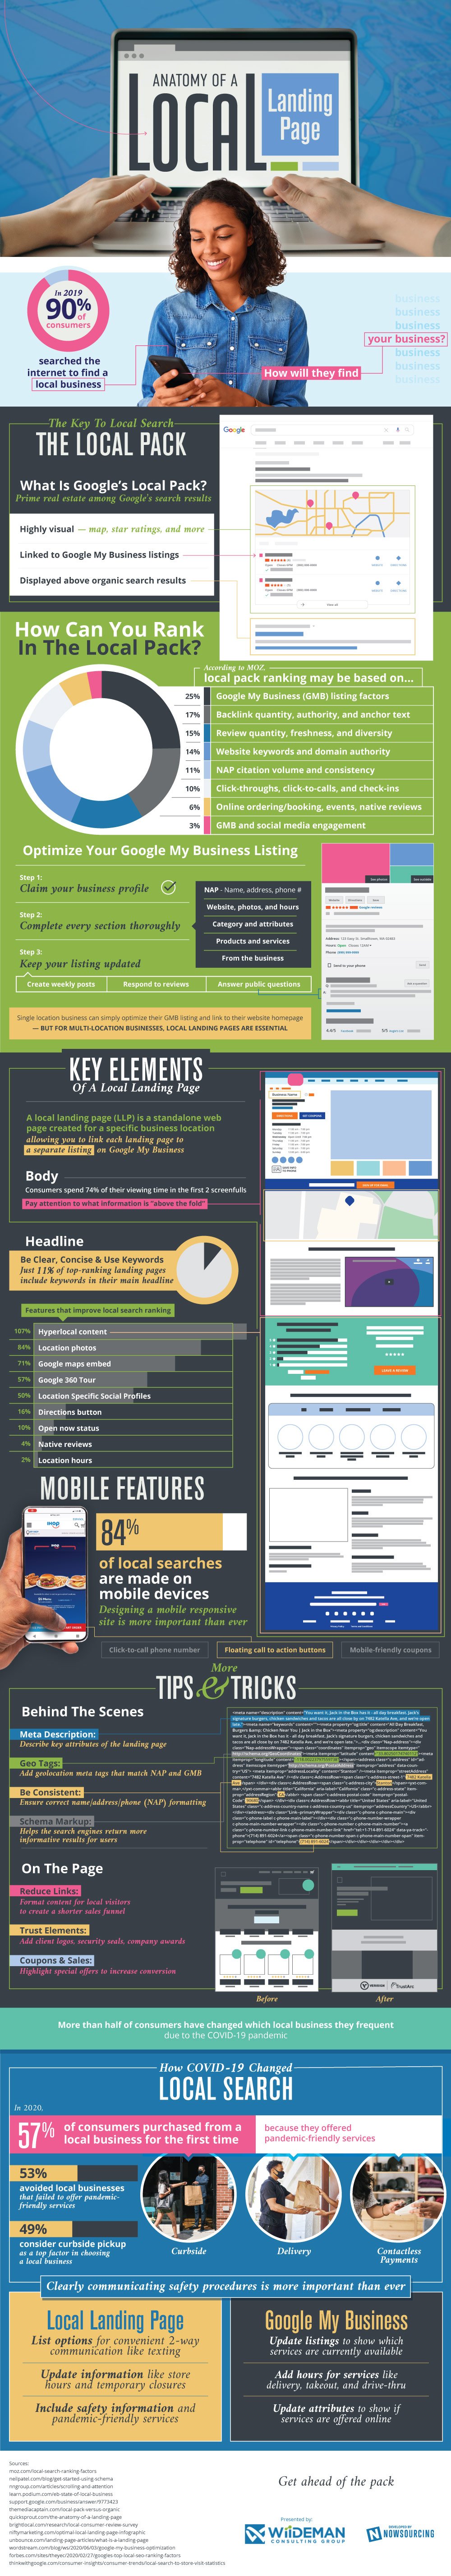 local landing page infographic